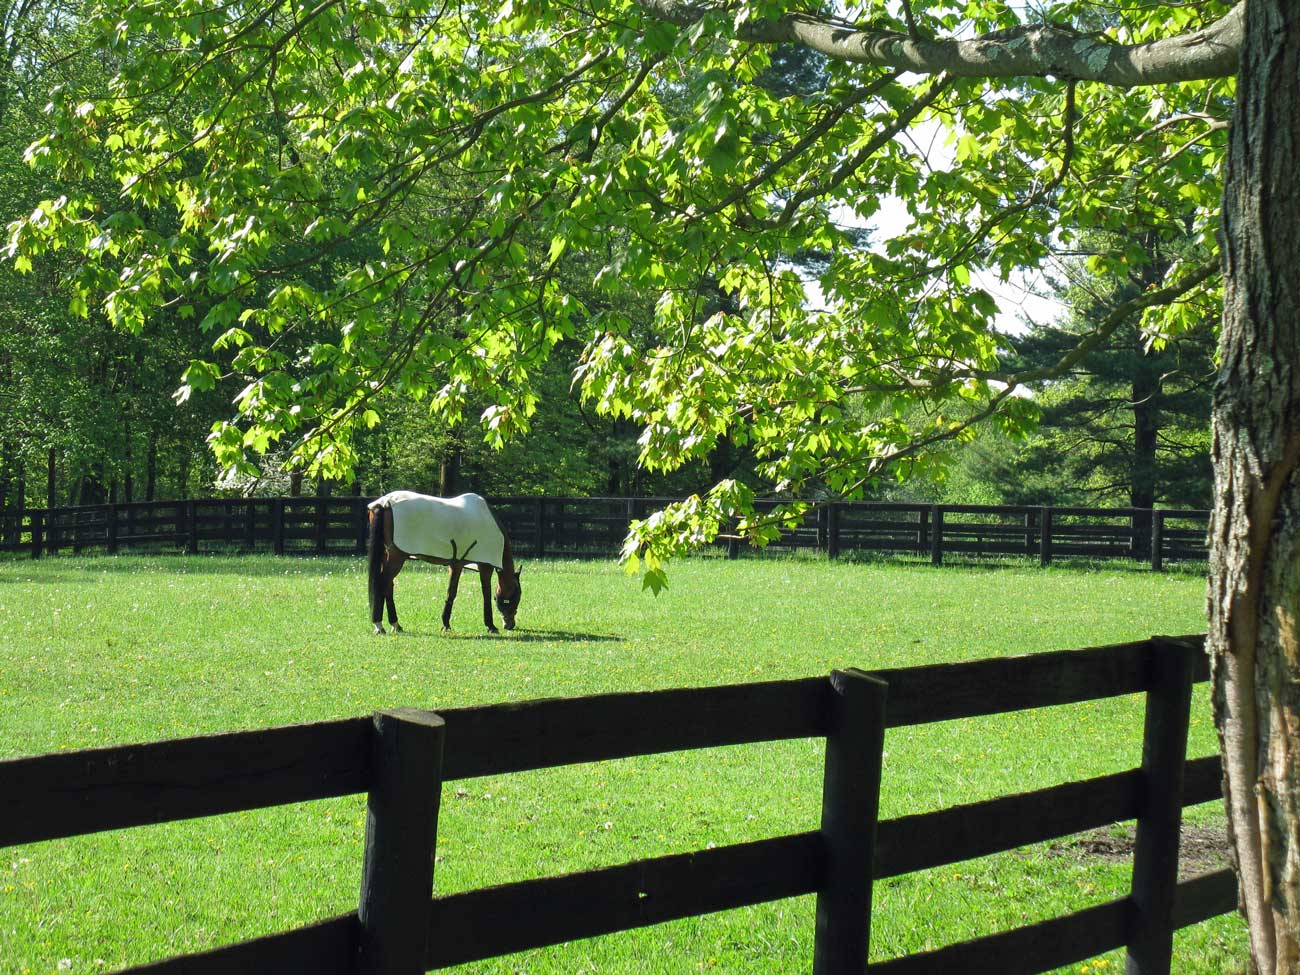 Horse grazing in summer field with leafy tree overhang